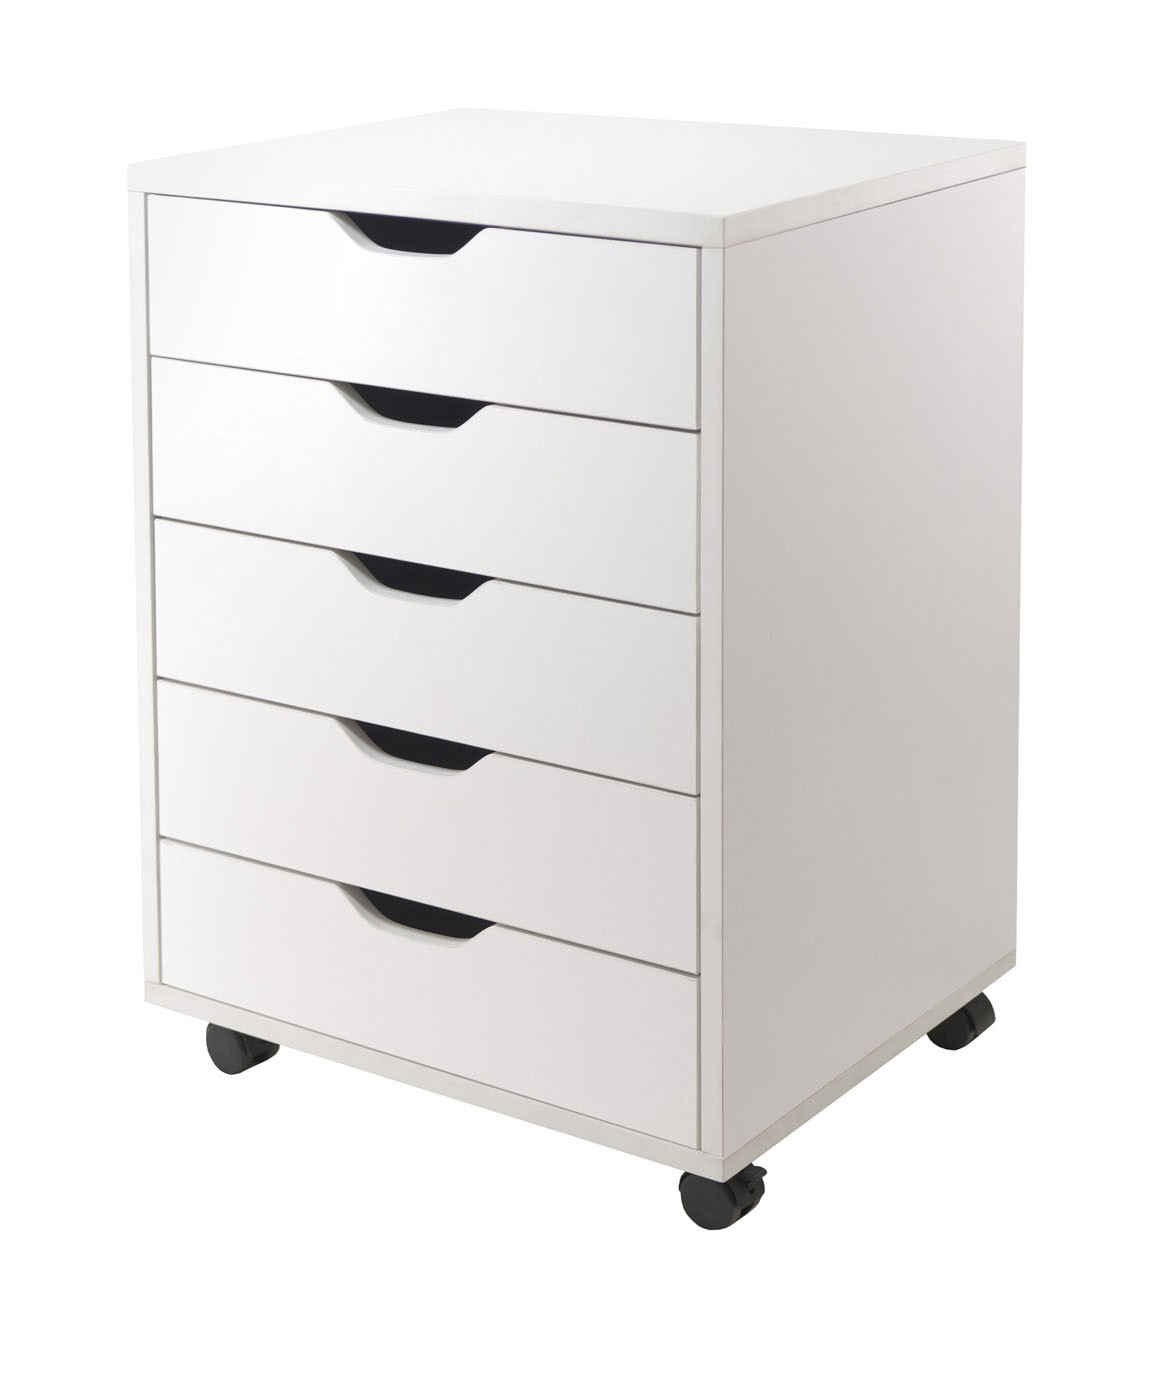 Winsome halifax wooden storage cabinet for closet office